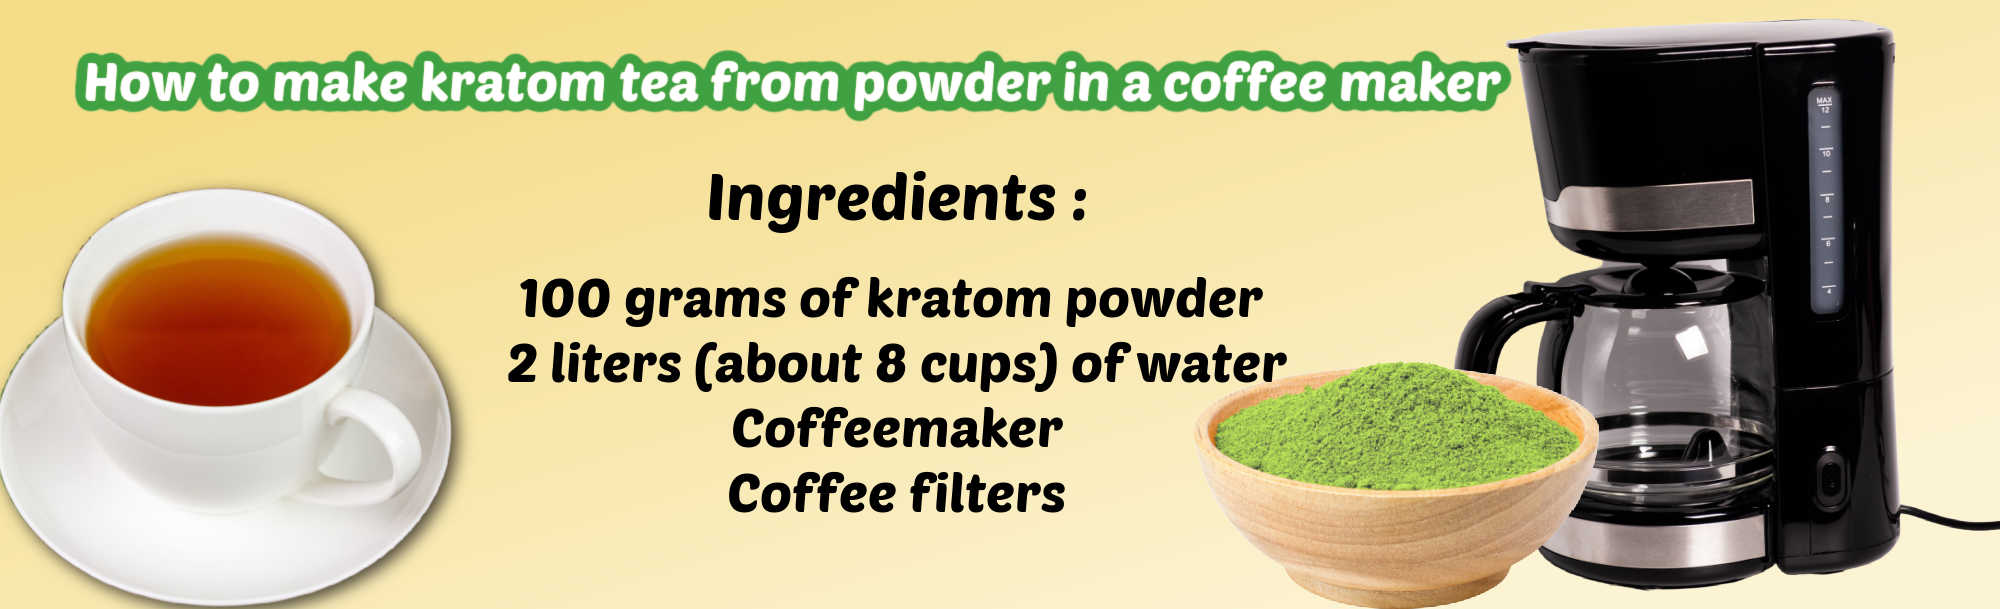 image of how to make kratom tea from powder in coffee maker